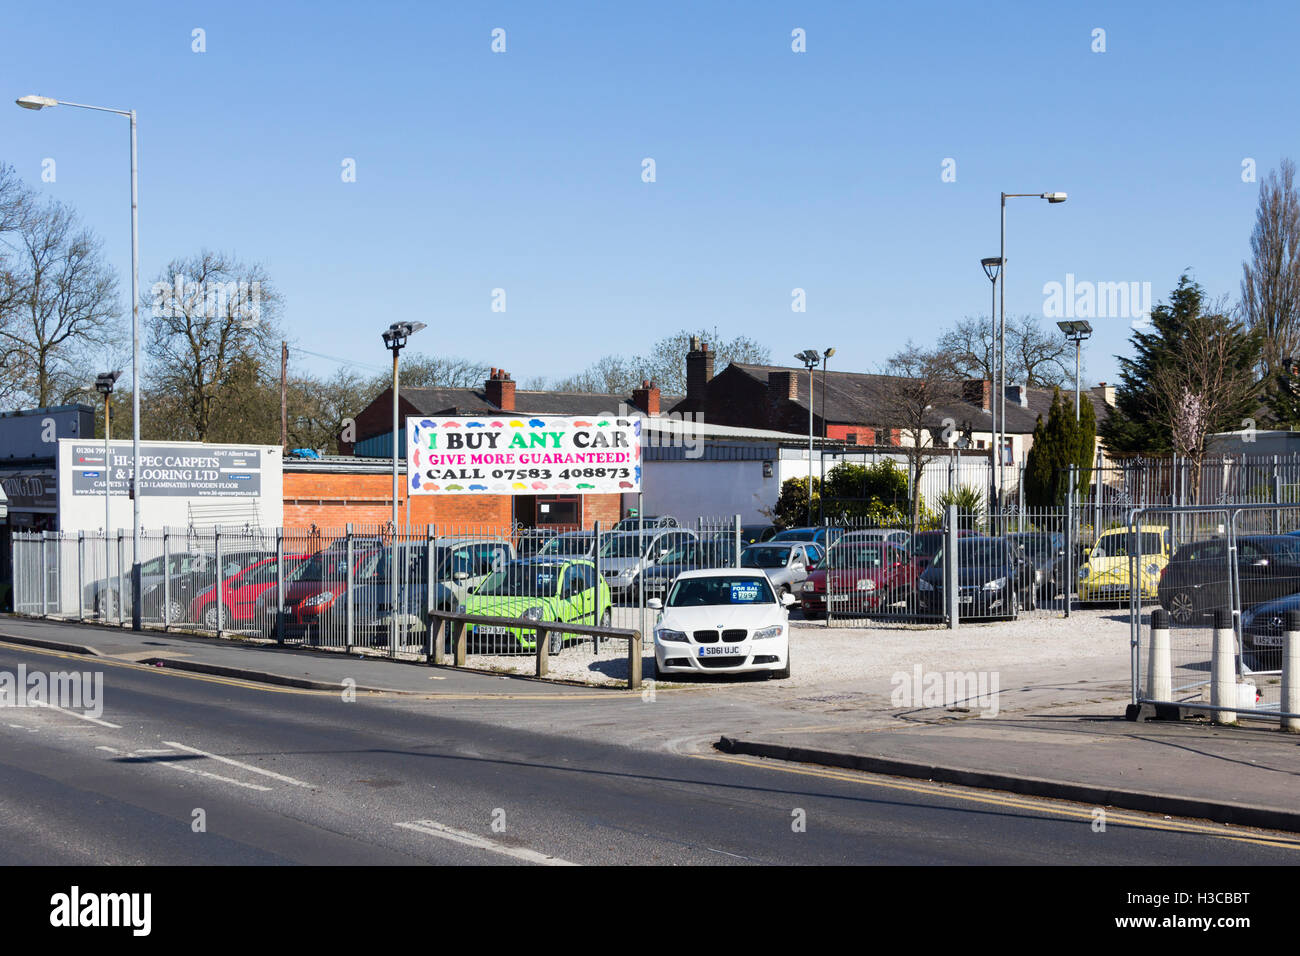 Small secondhand car dealer dealing in the lower end of the secondhand car market, advertising  the business as 'I Buy Any Car'. Stock Photo